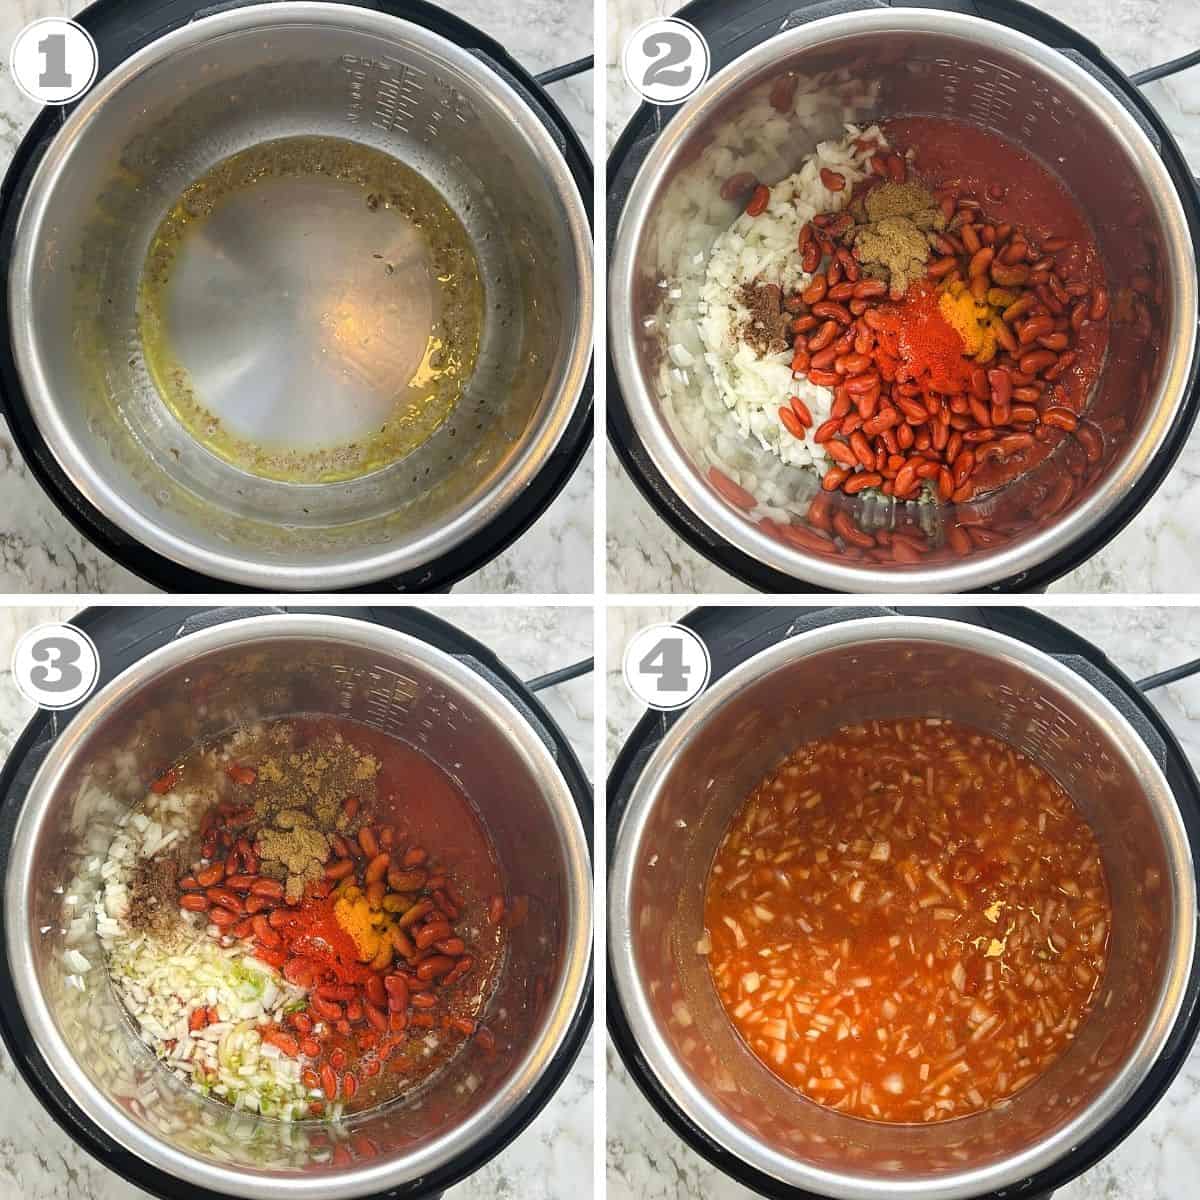 photos one through four showing how to make rajma in Instant Pot